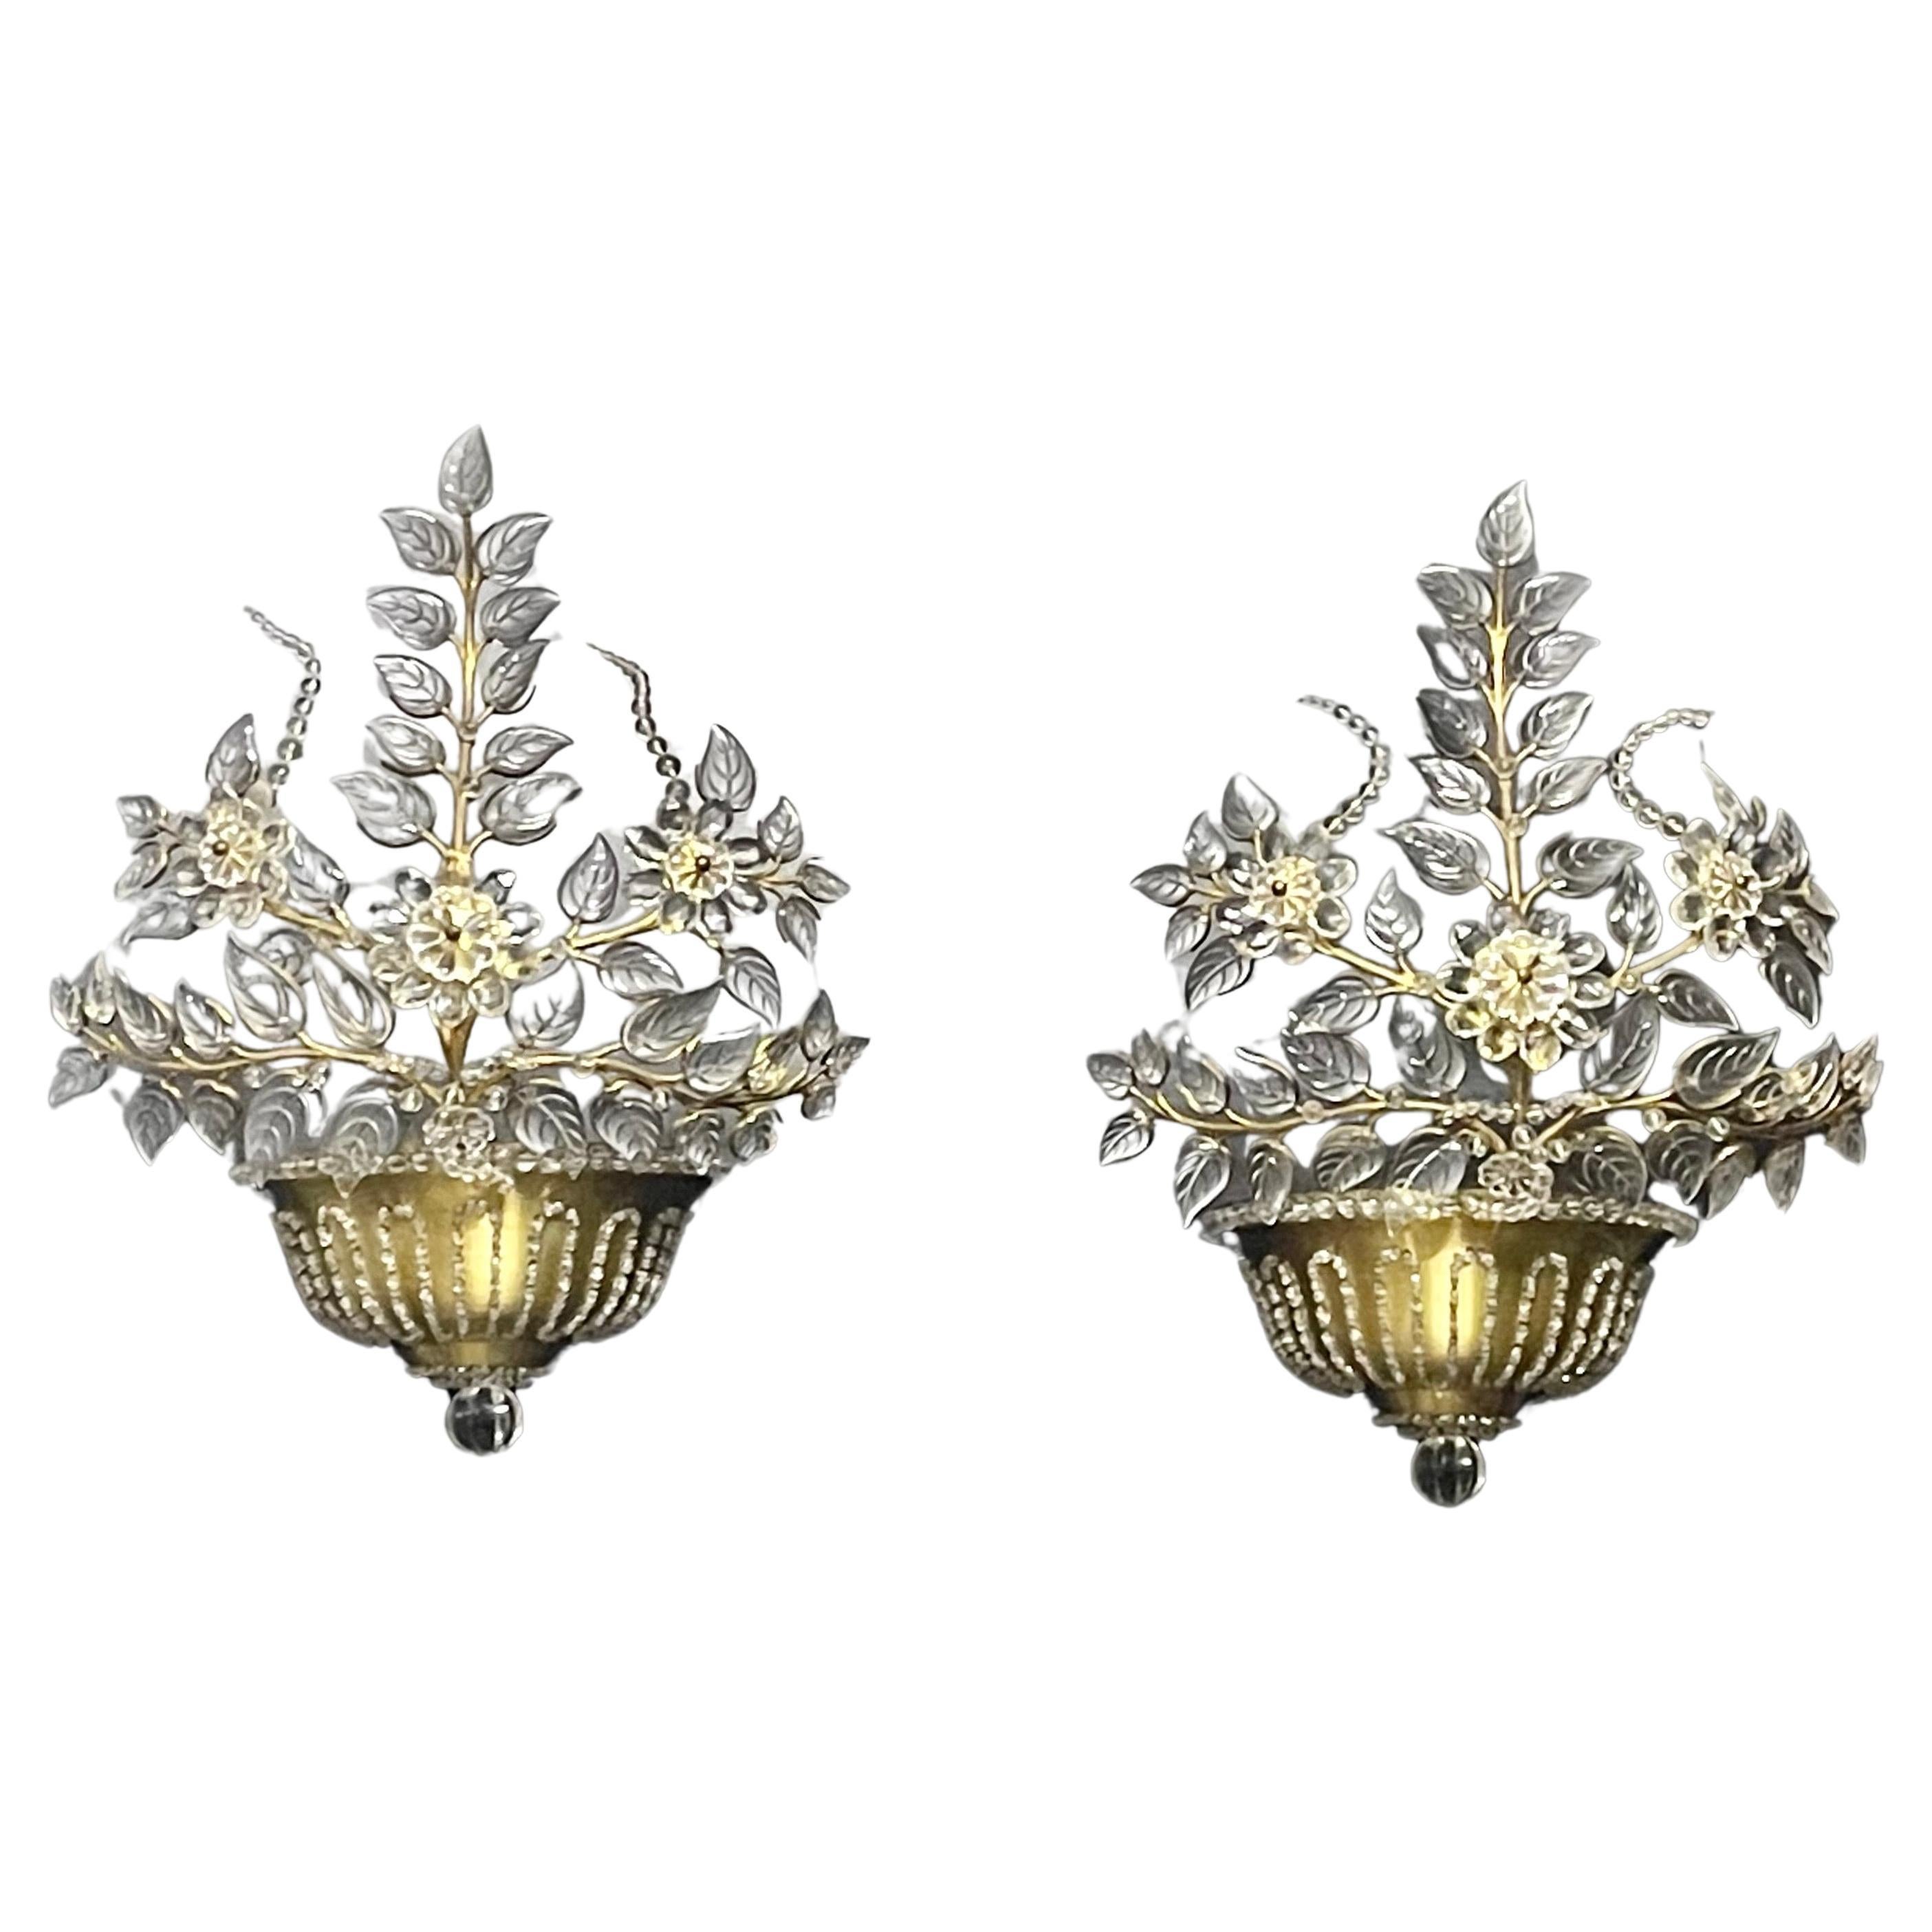 Beautiful Pair of Large Wall Sconces n the Style of Maison Baguès, circa 1950s